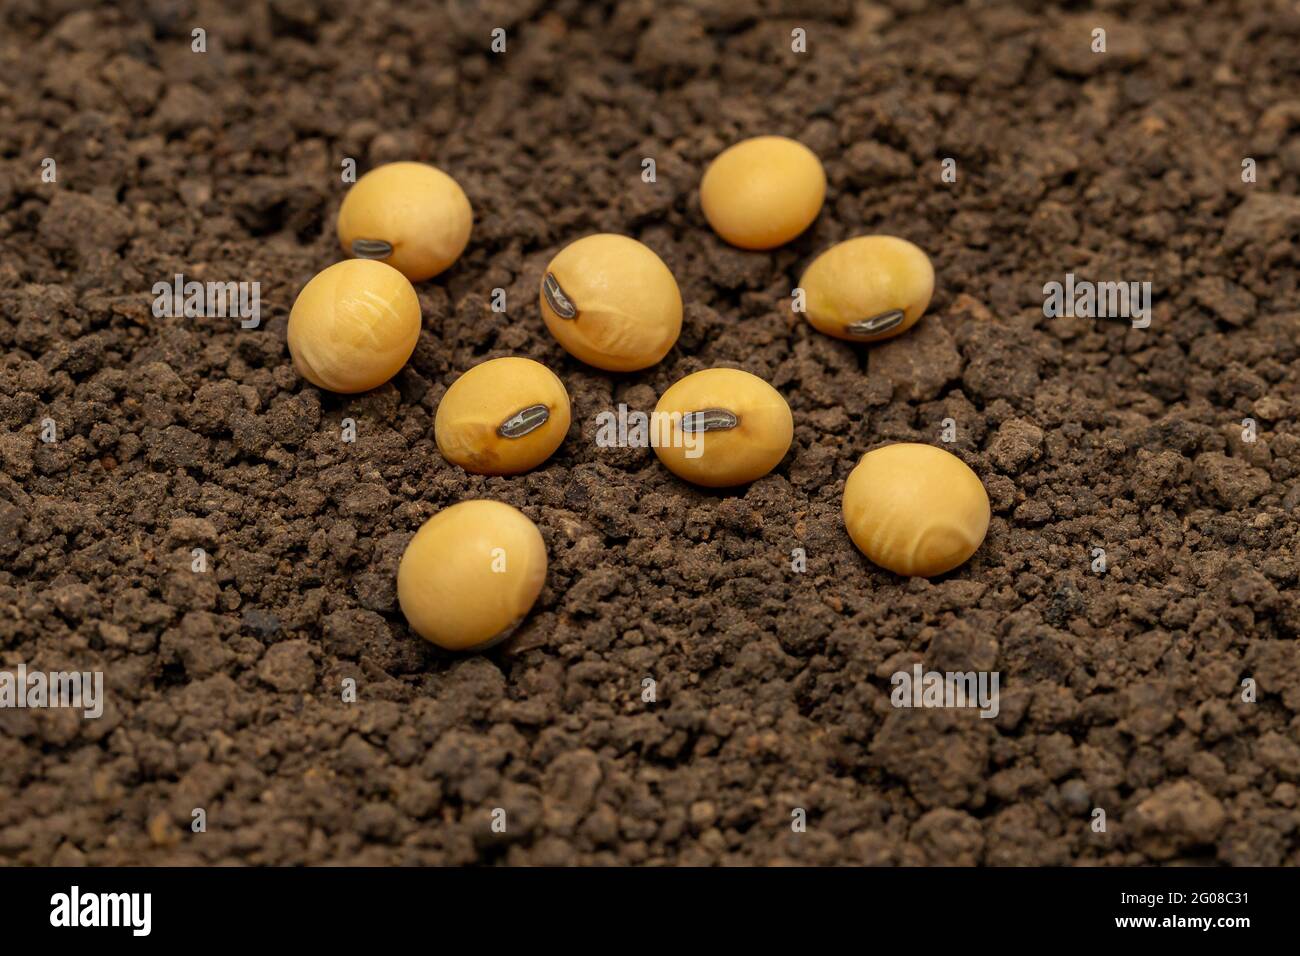 Closeup of soybean seed in soil. Concept of agriculture, farming and soy products Stock Photo